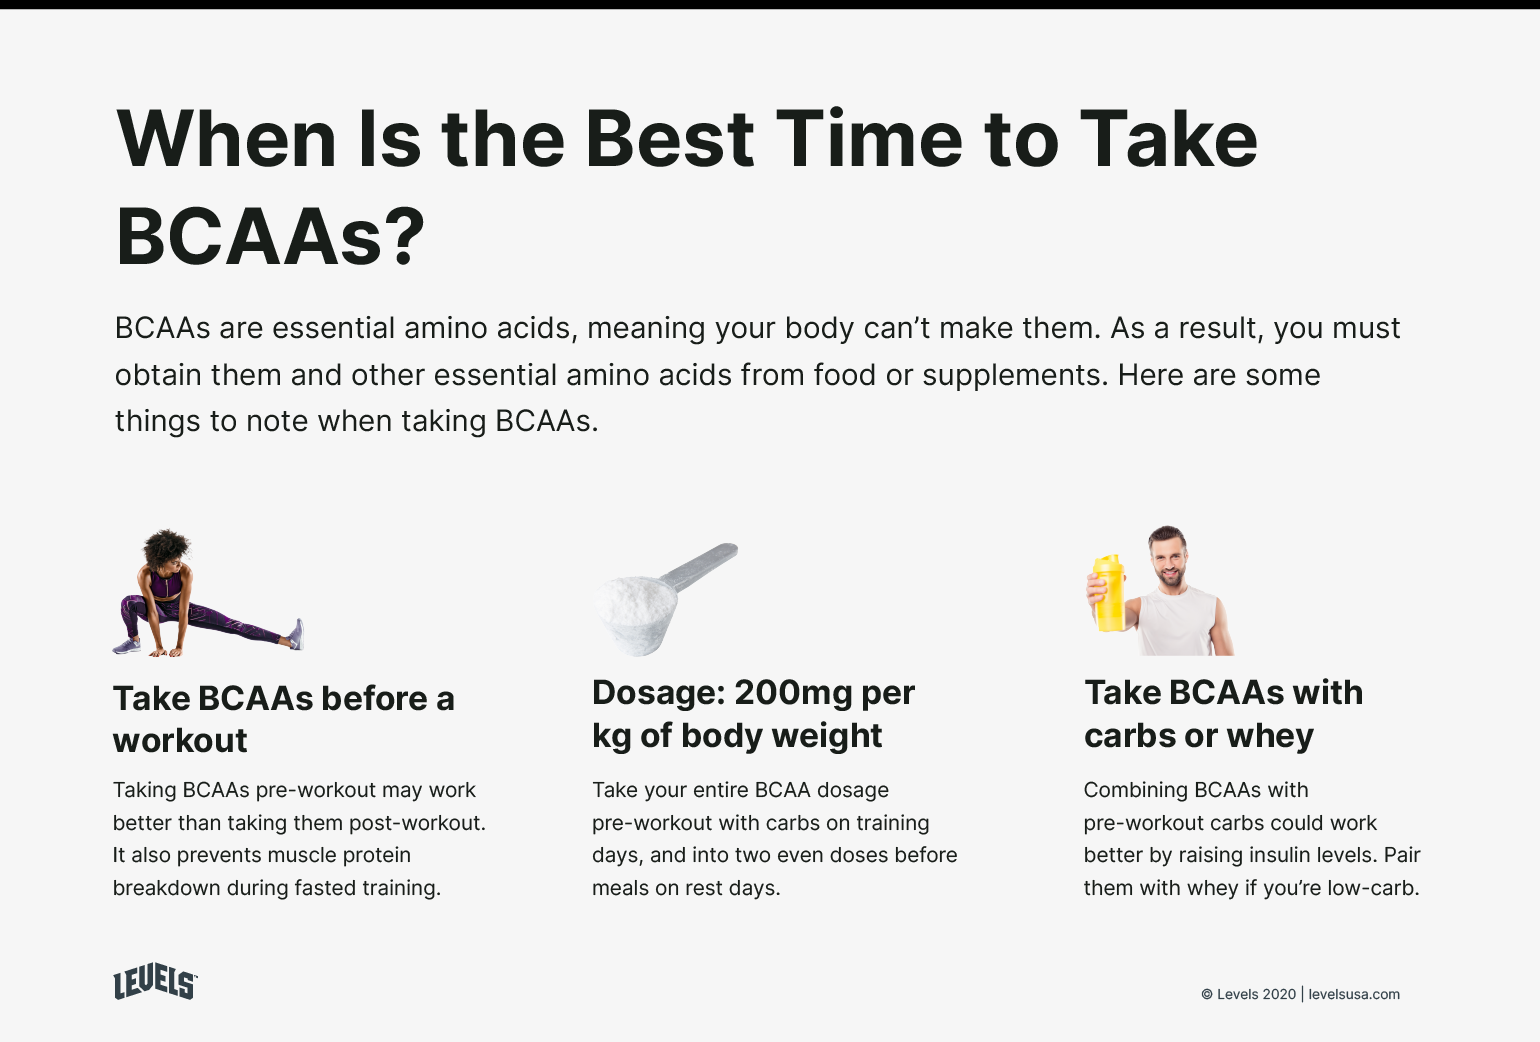 Is it bad to take BCAA every day?